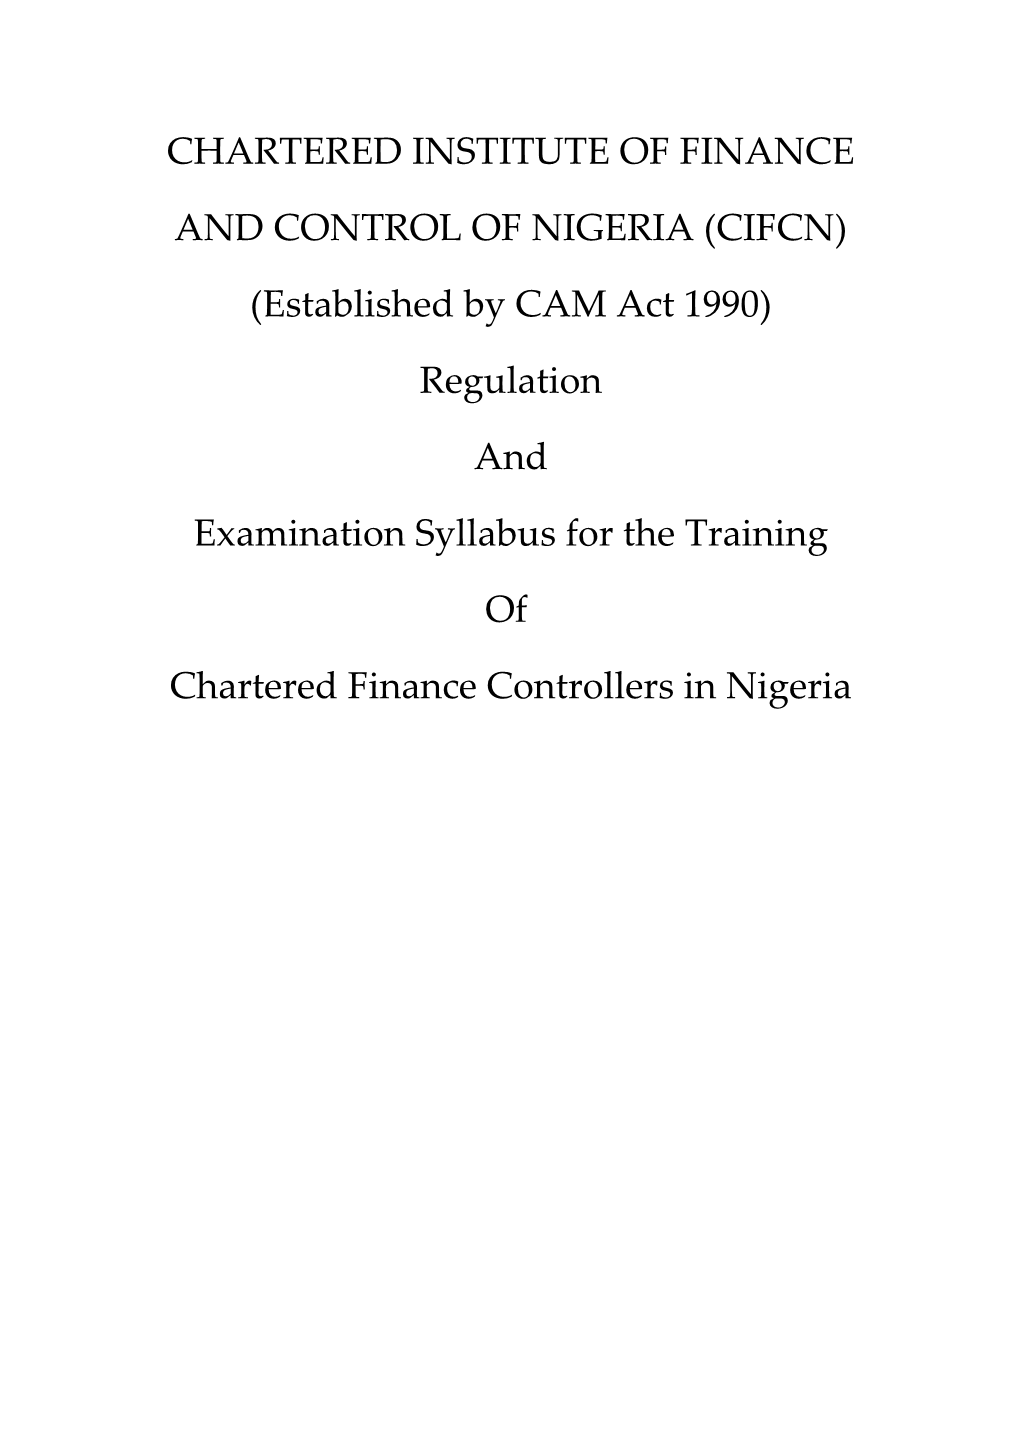 Chartered Institute of Finance and Control of Nigeria (Cifcn)